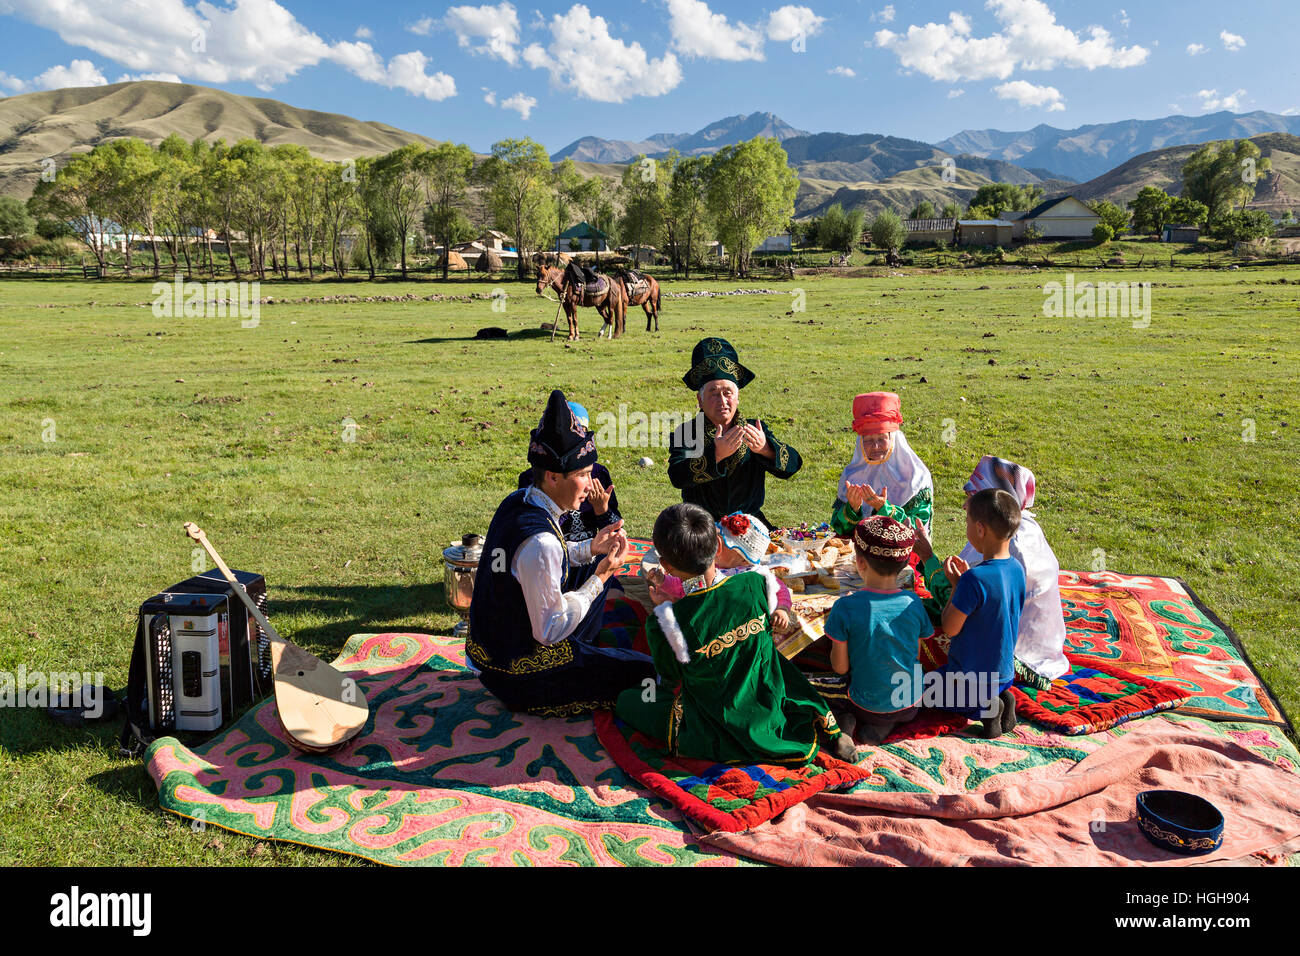 Kazakh family praying all together before they start having their picnic lunch. Stock Photo